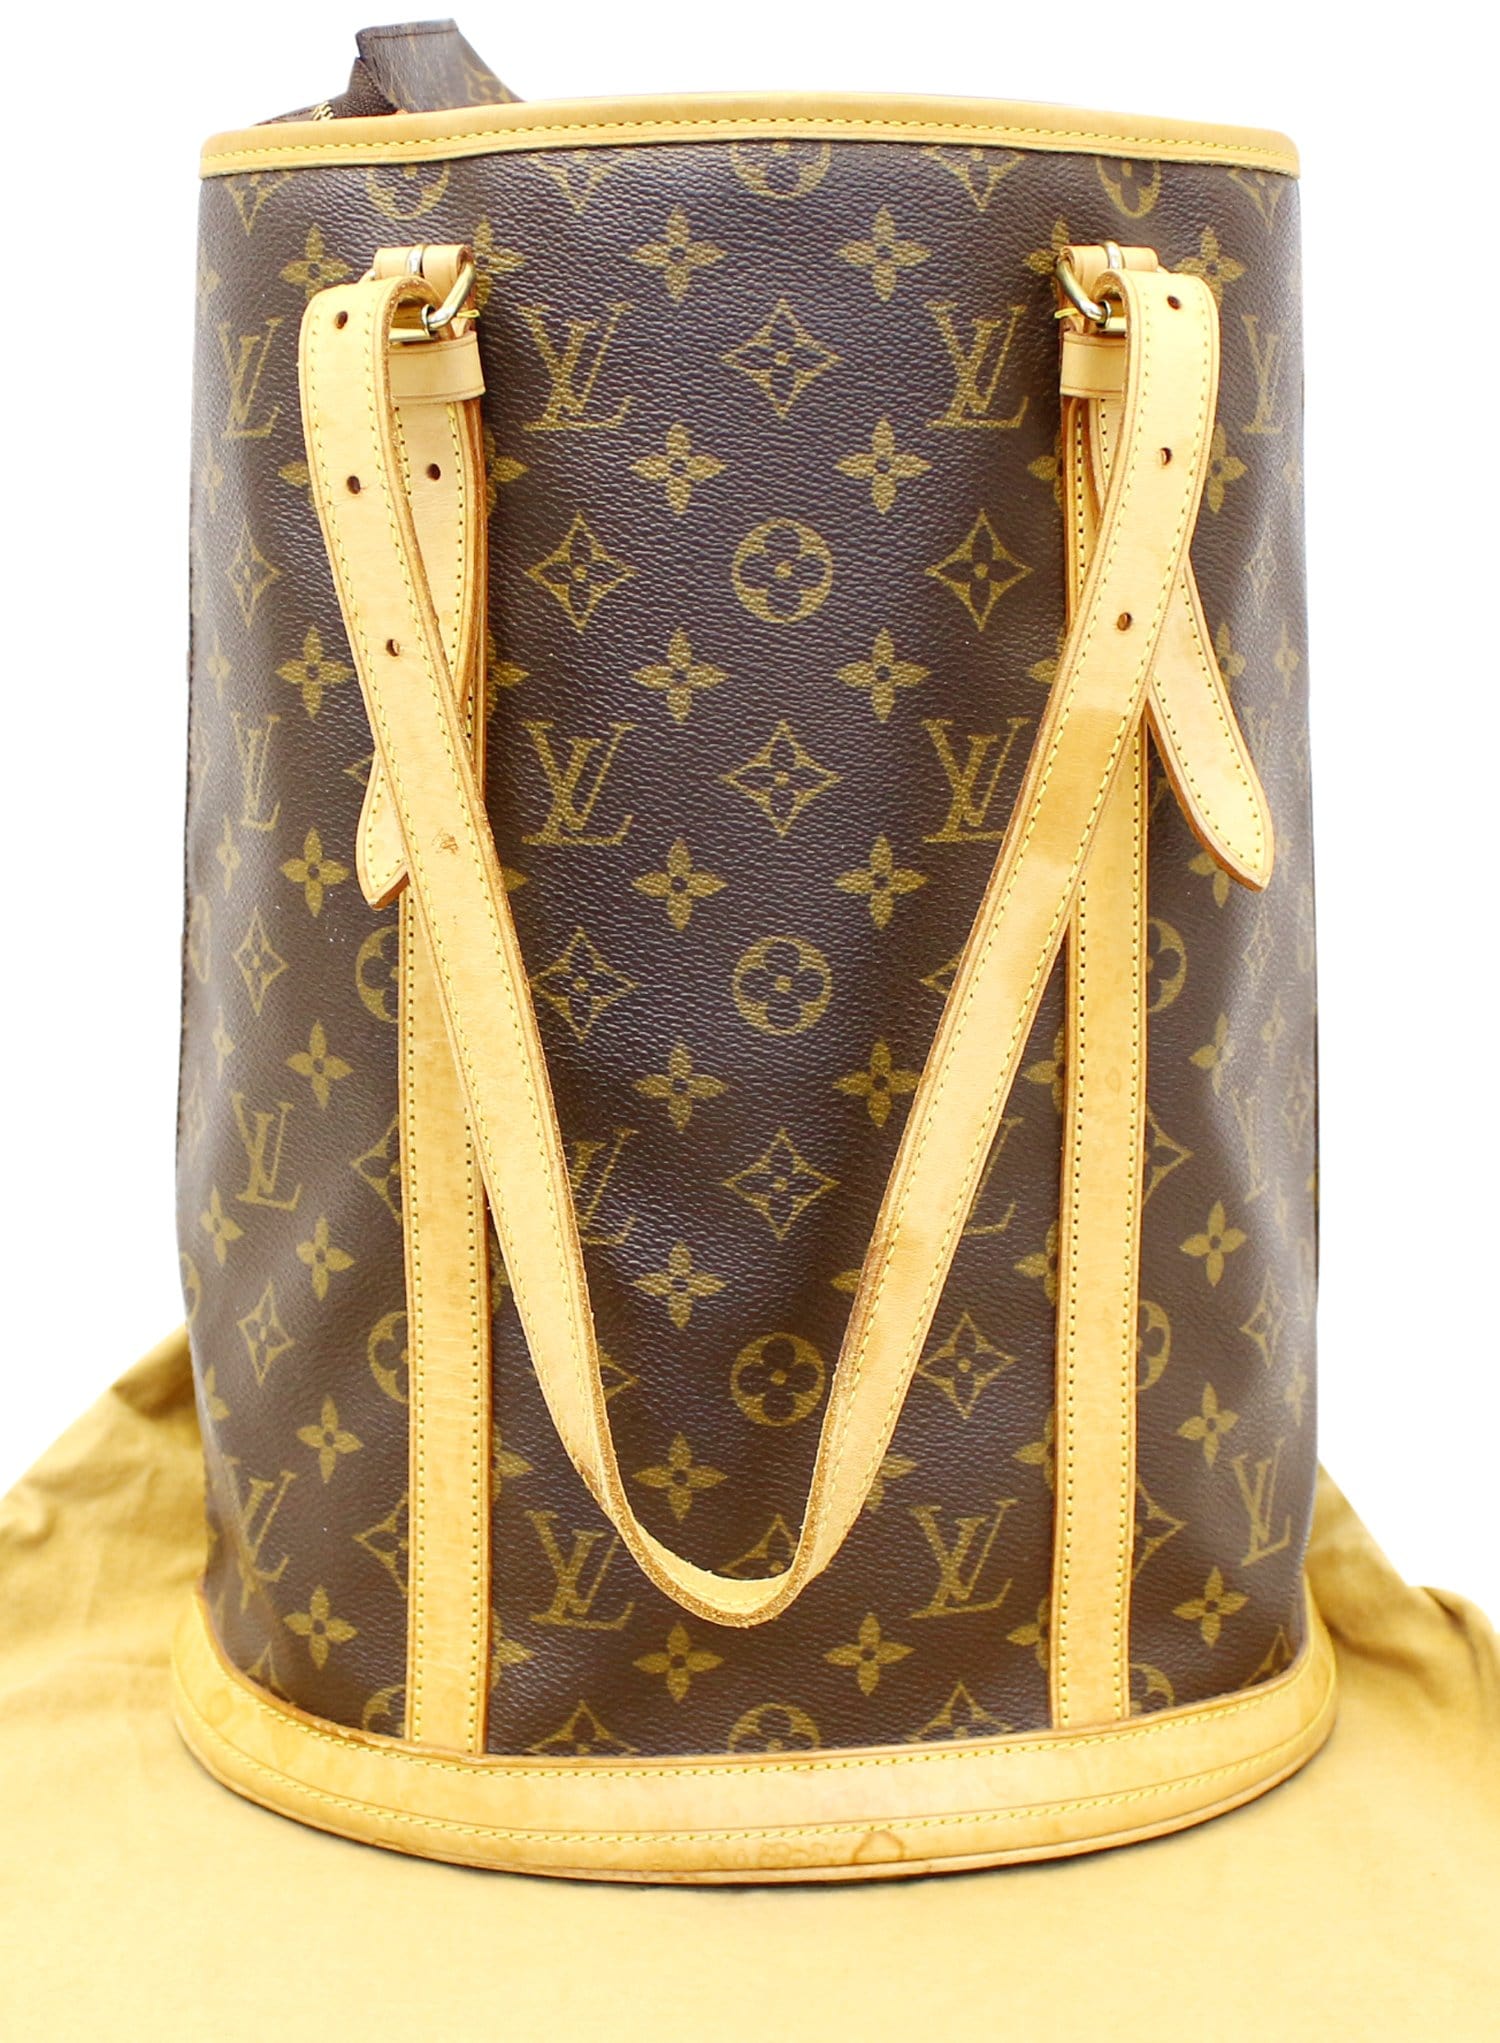 Louis Vuitton Bucket Gm Canvas Tote Bag (pre-owned) in Brown